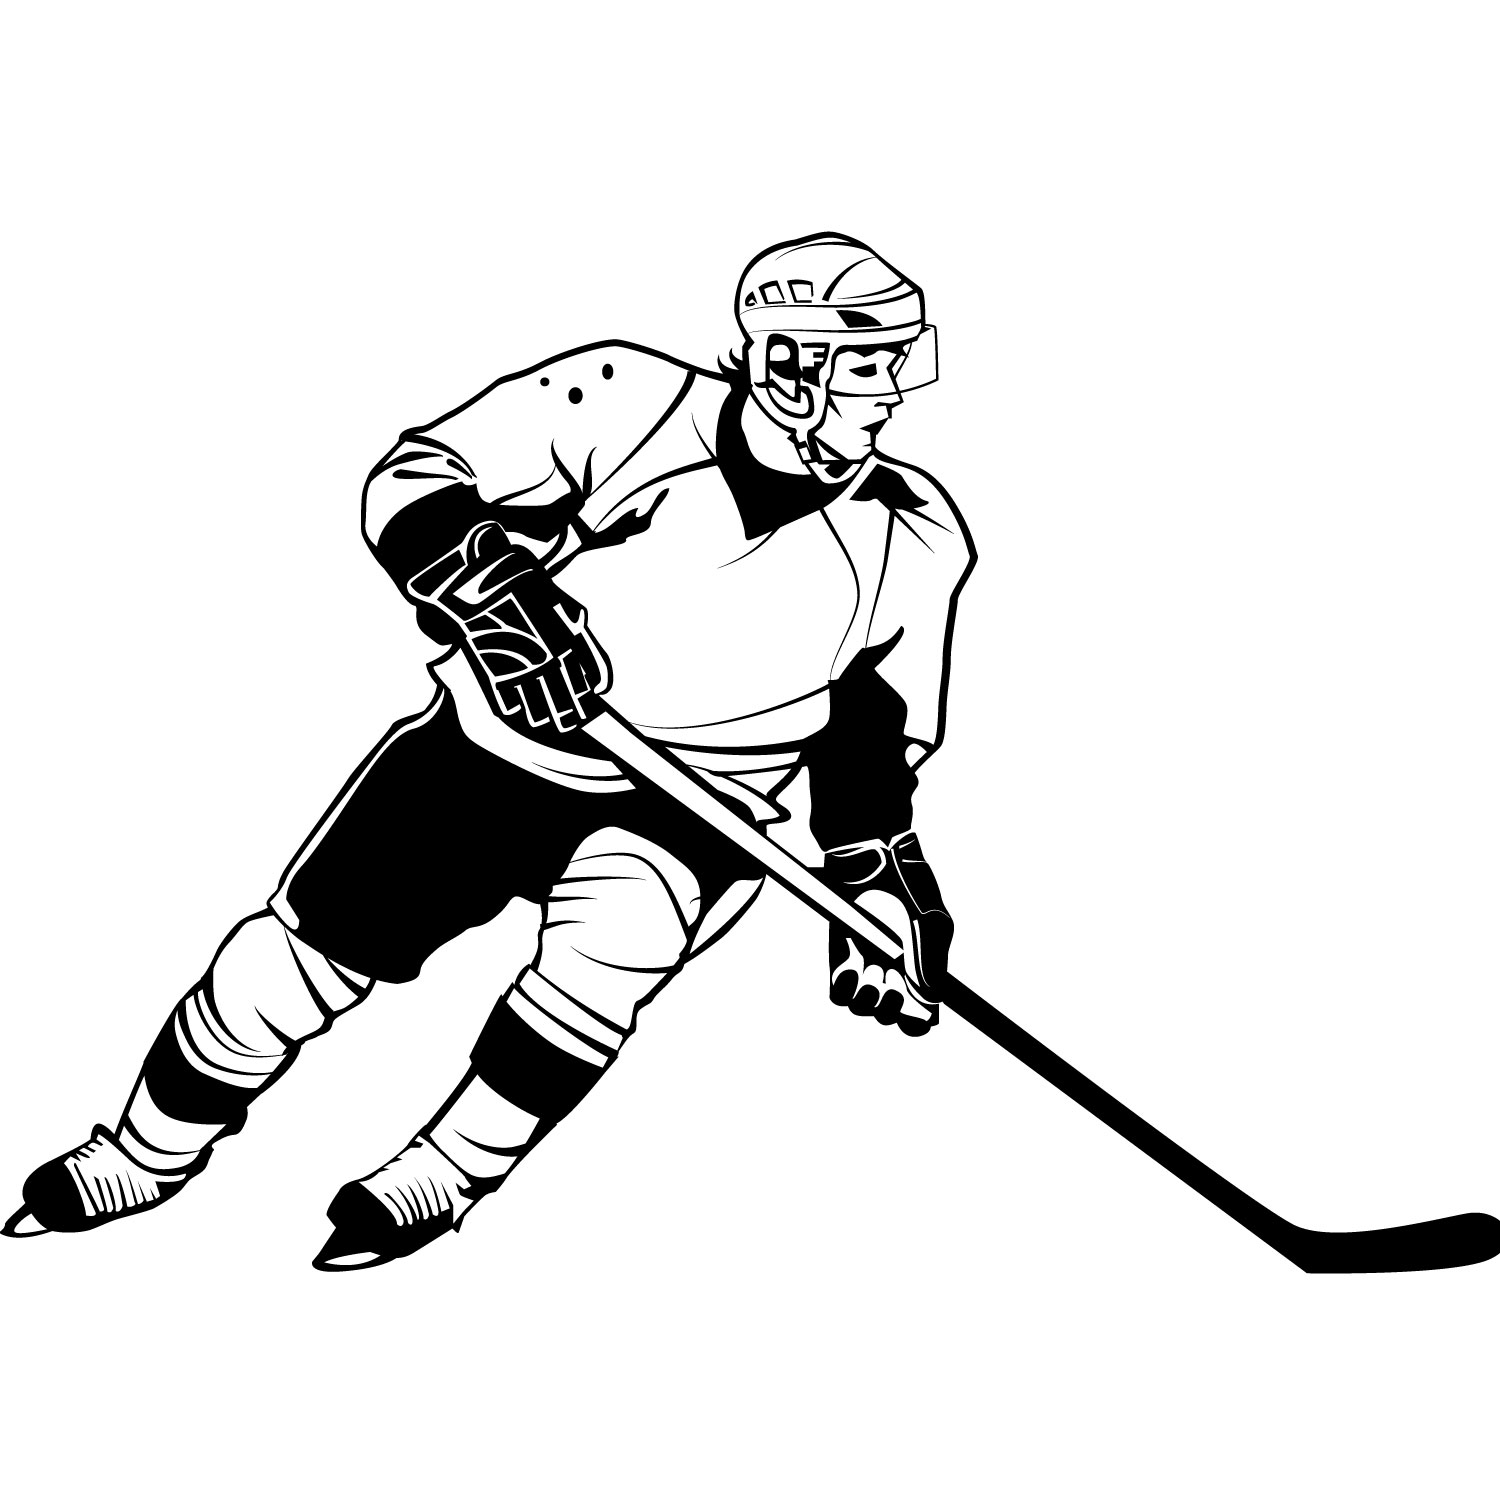 1000  images about clipart Hockey on Pinterest | Snoopy love, Clip art and Snoopy